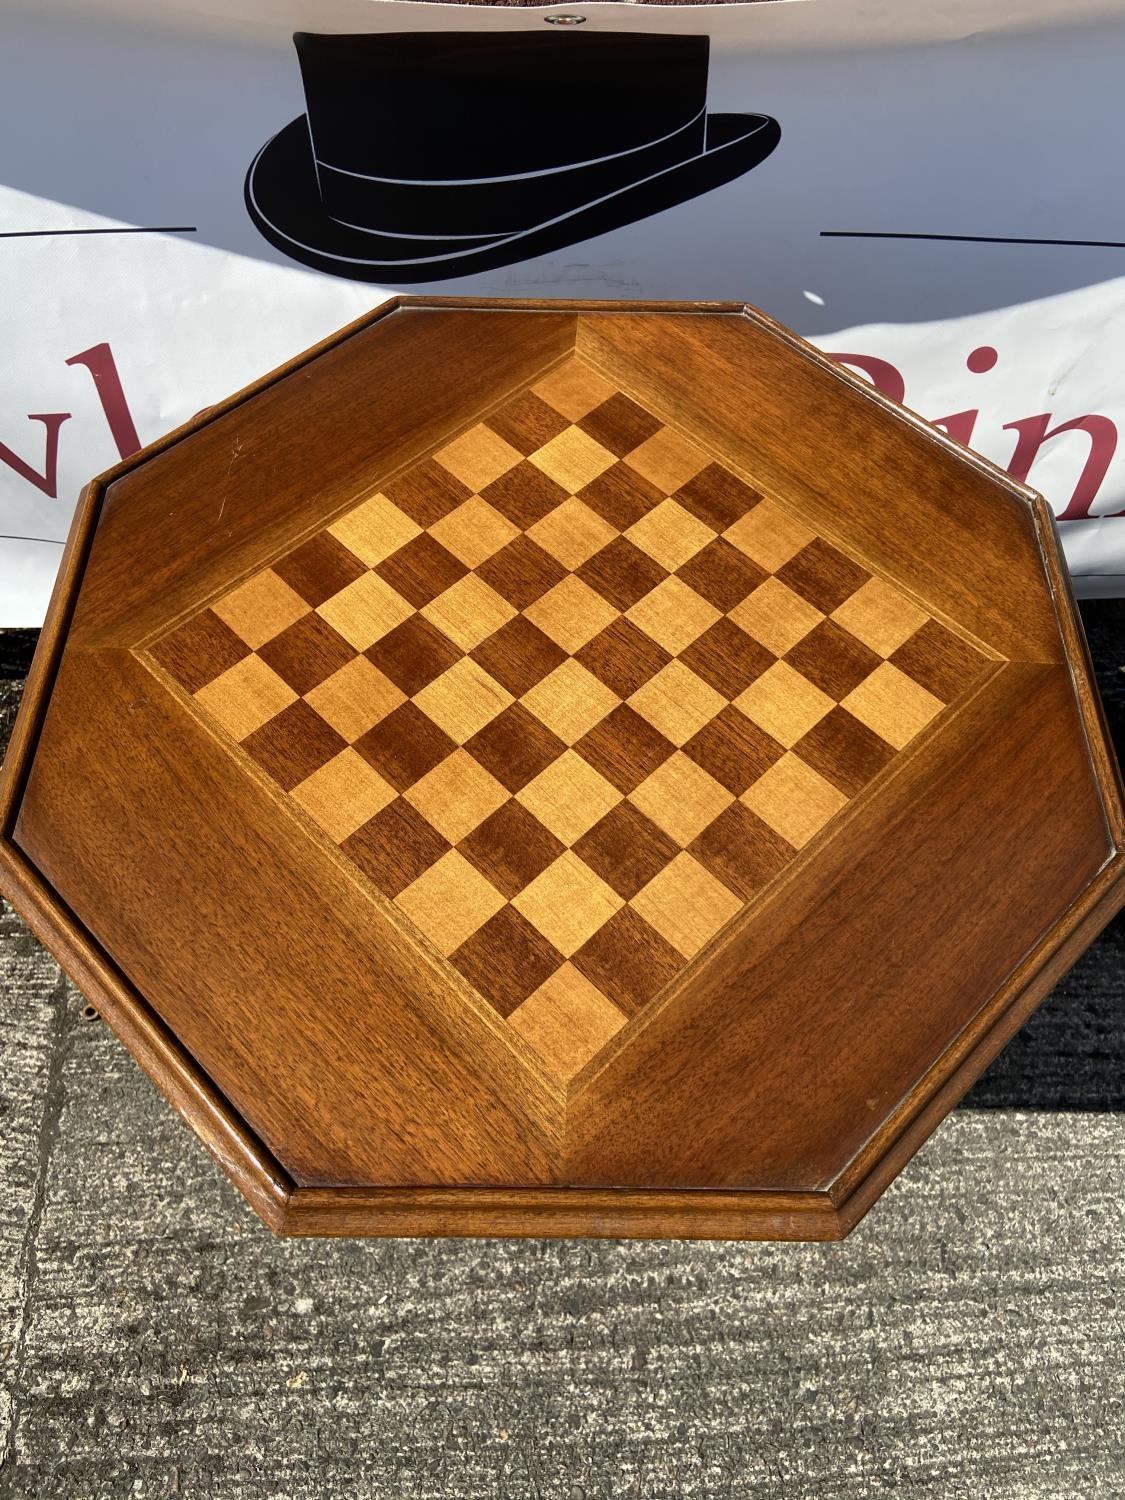 Single pedestal chess board top table [69x59x59cm] - Image 3 of 3